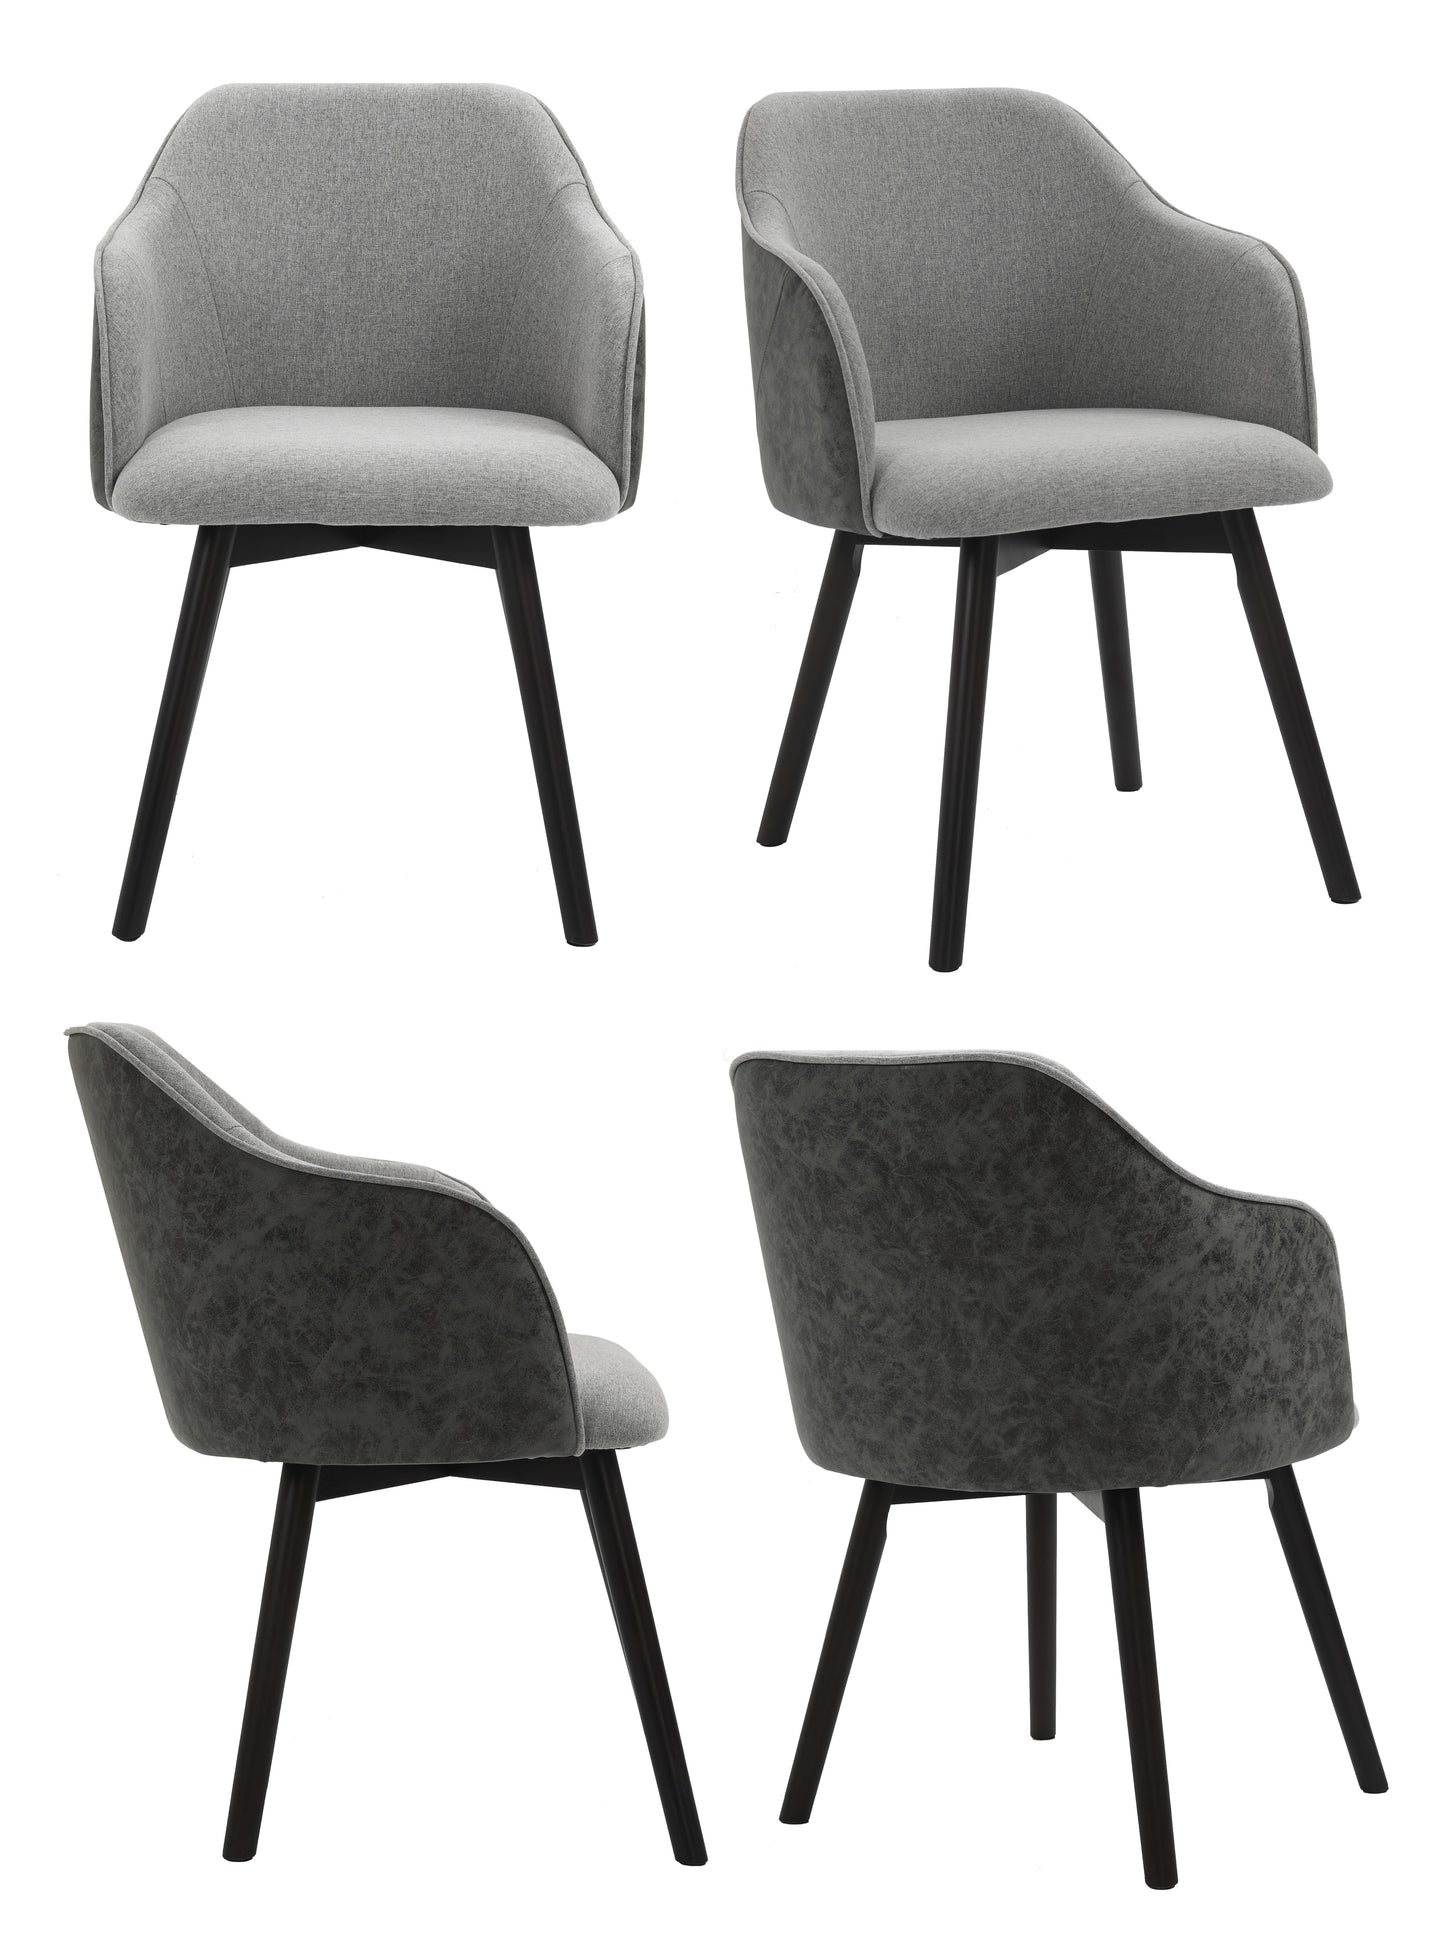 Upholstered dining armchairs - Leather/Fabric combination